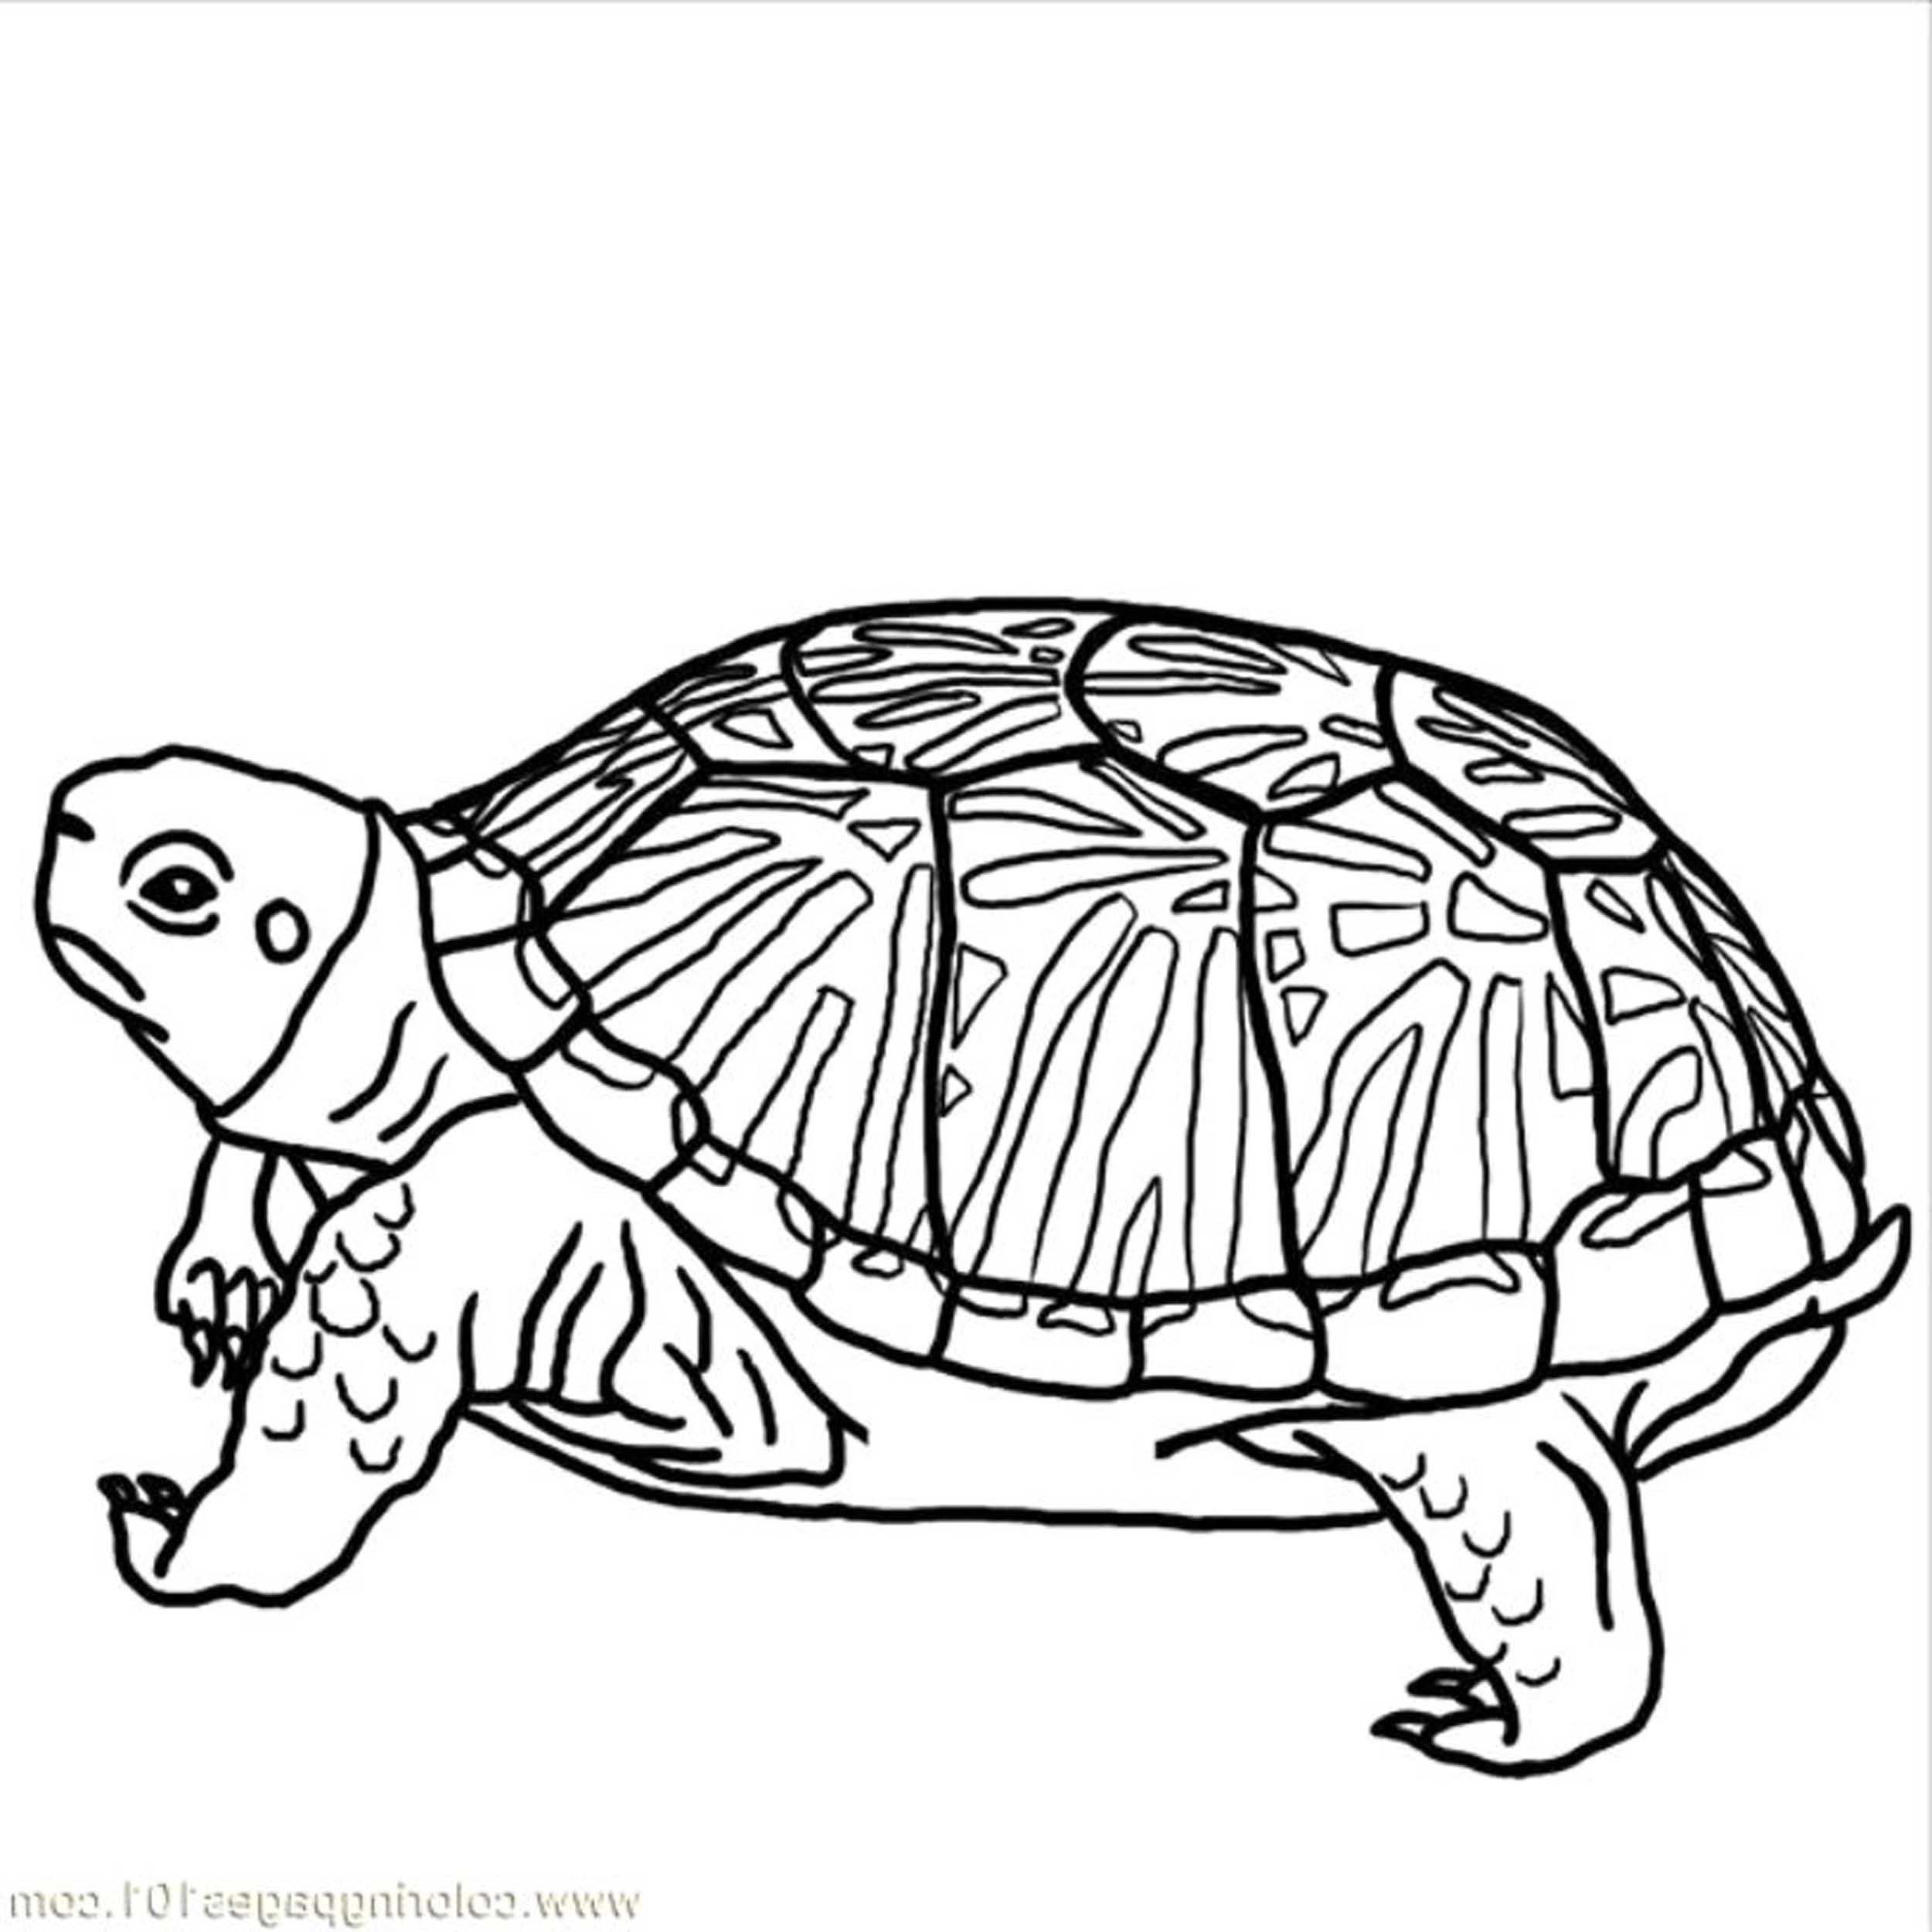 Turtle Parking Coloring Page   coloring.electric college.co.il